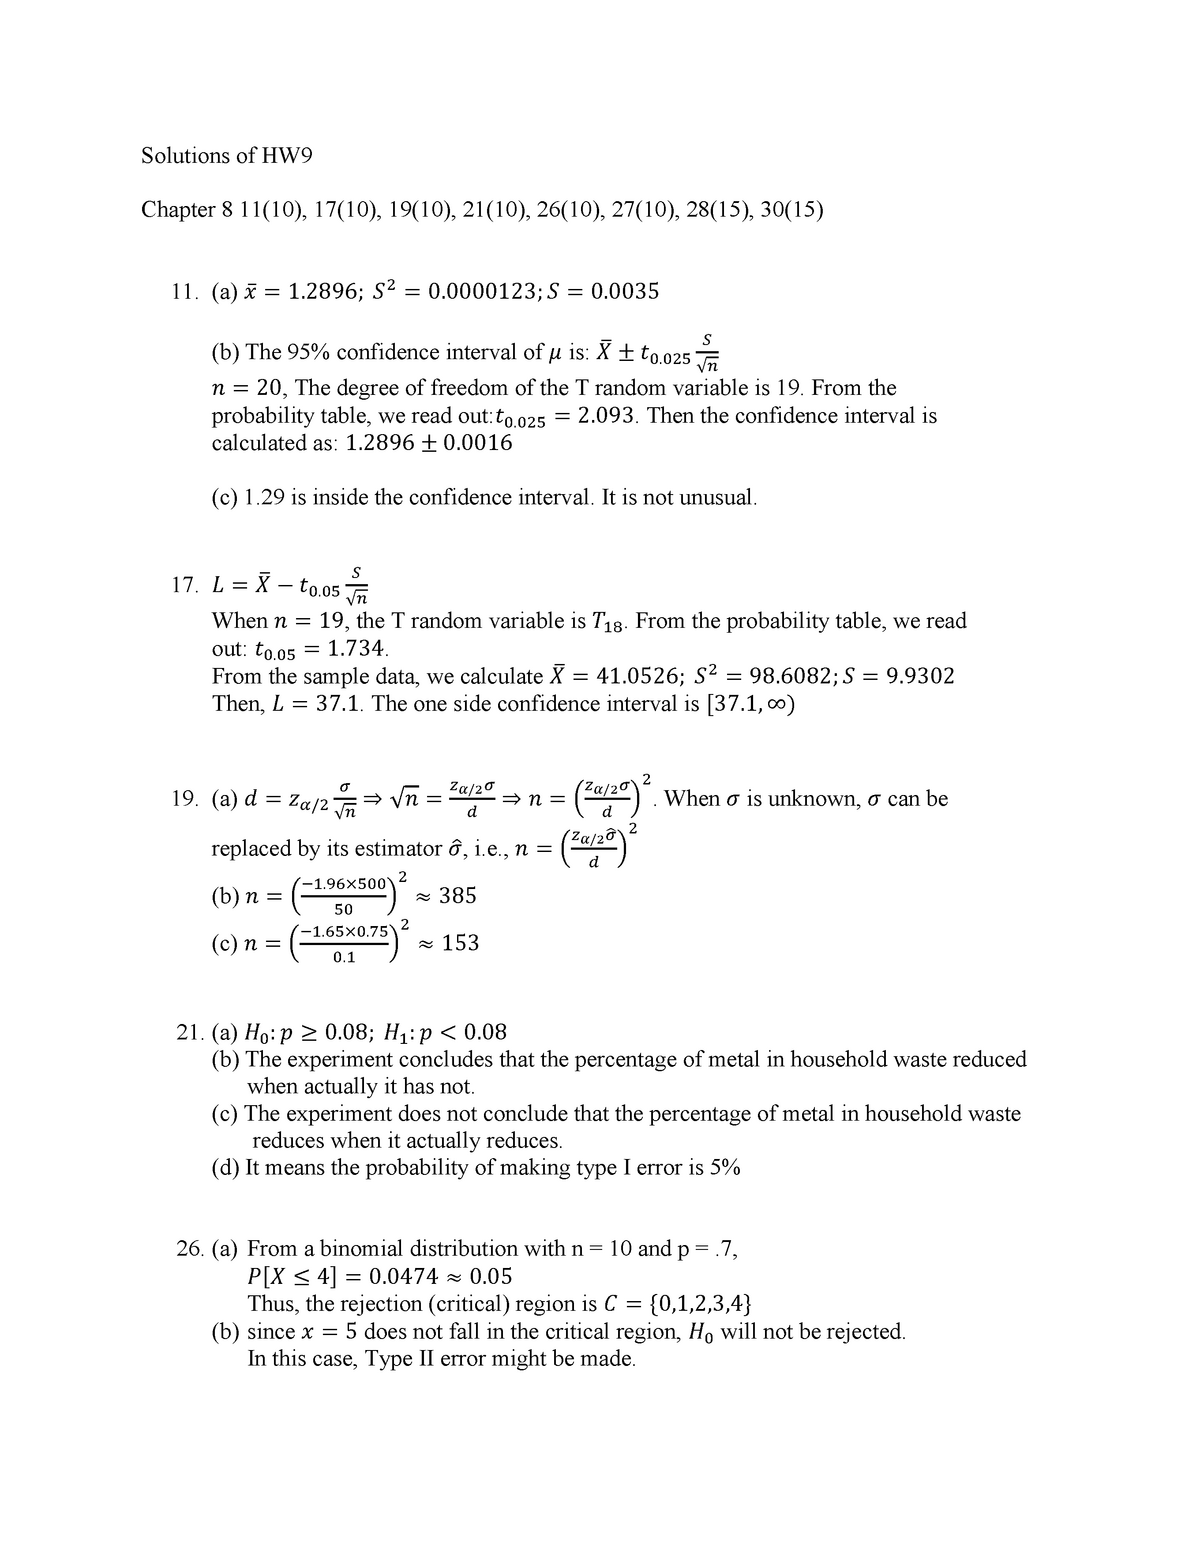 Solution Of Hw9 Sp19 Solutions Of Hw Chapter 11 10 17 10 19 10 21 10 26 10 27 Studocu